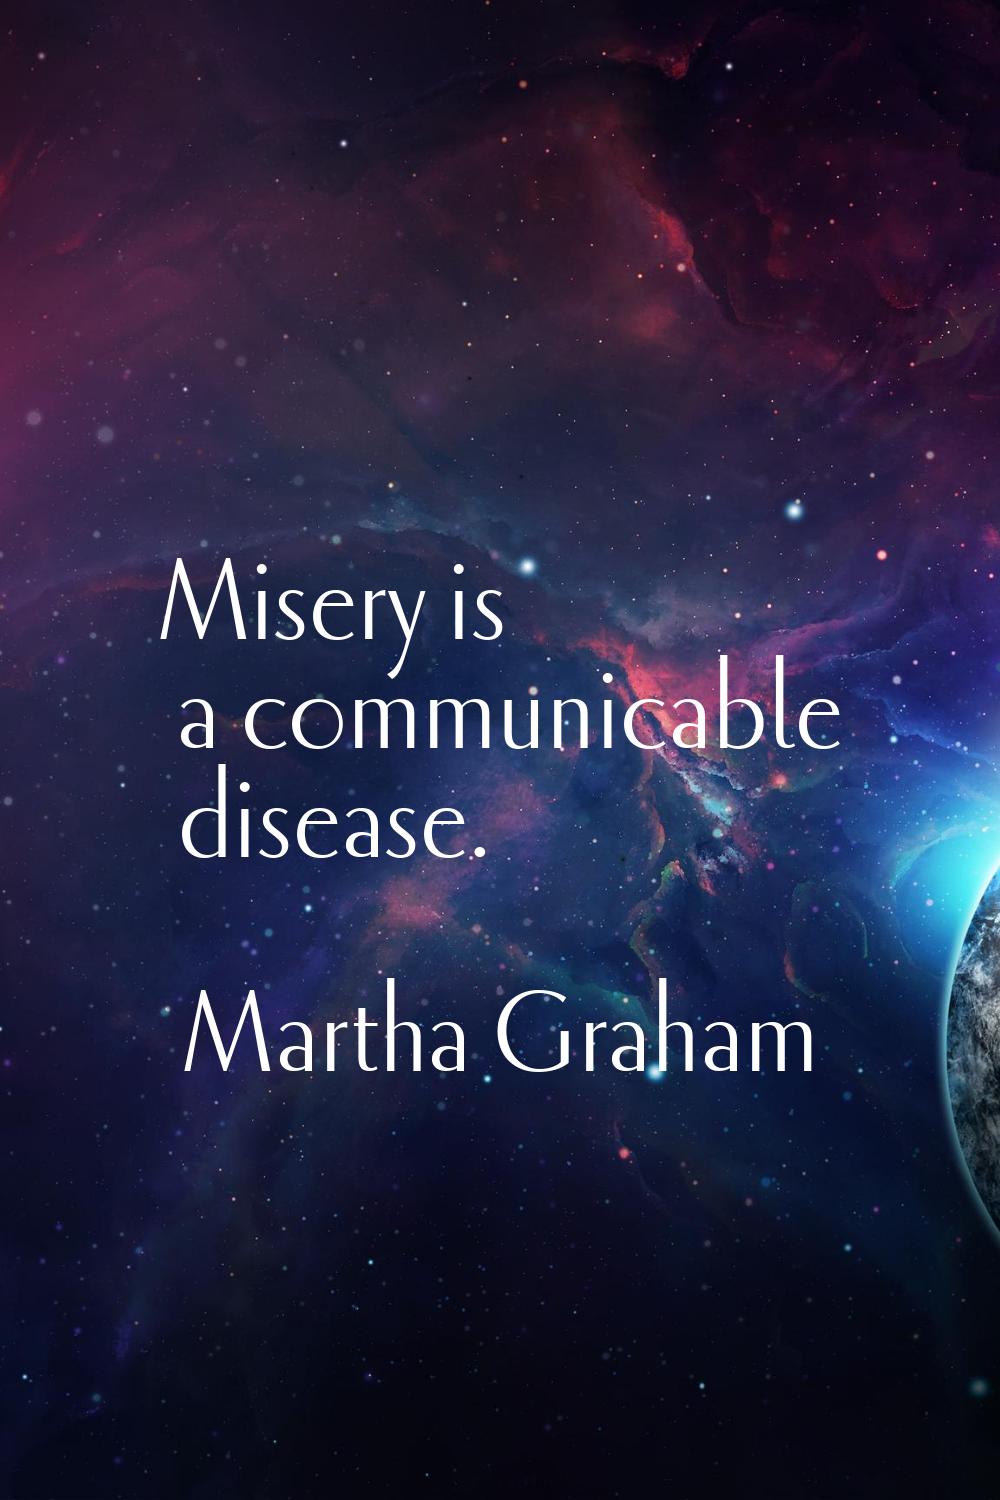 Misery is a communicable disease.